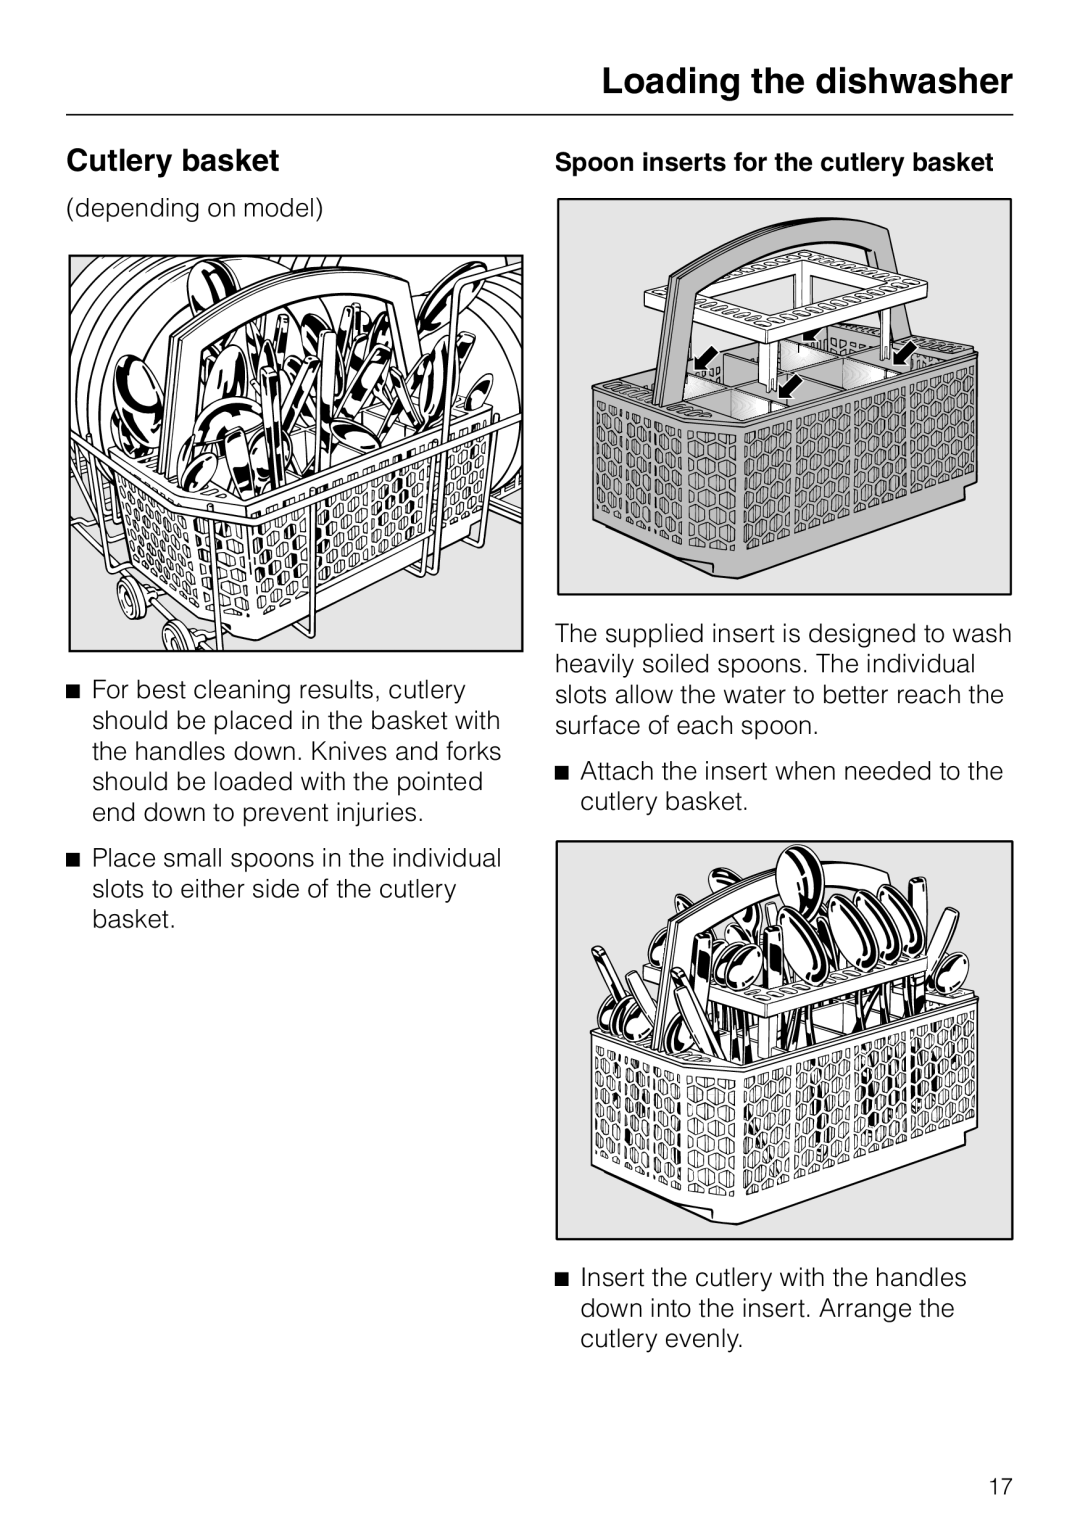 Miele G 2150, G 1150 operating instructions Cutlery basket, Loading the dishwasher, Spoon inserts for the cutlery basket 